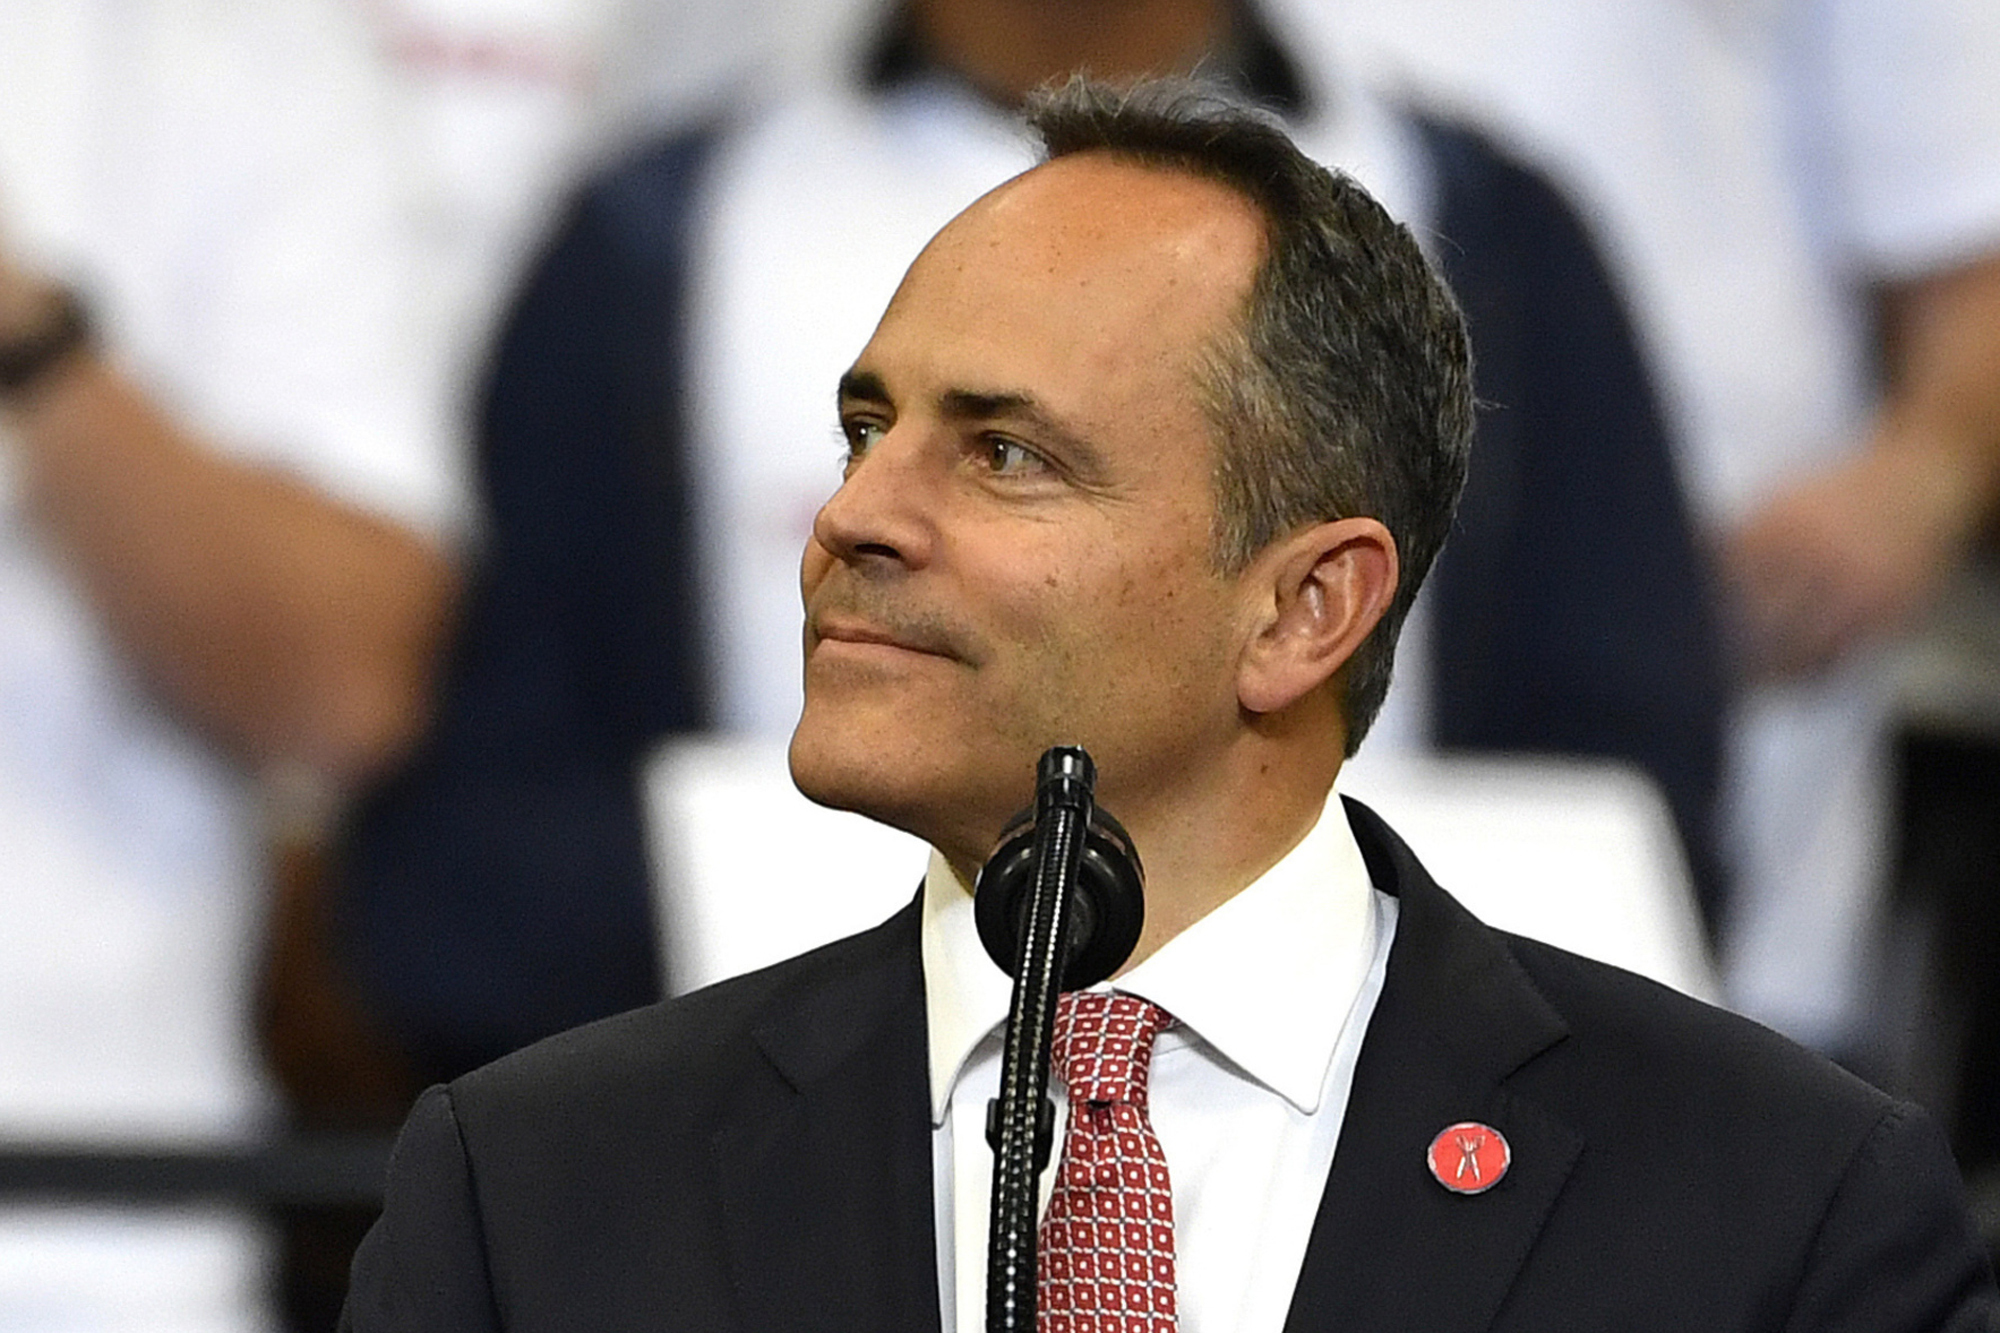 PHOTO: Kentucky Gov. Matt Bevin looks out at the crowd during a campaign rally with President Donald Trump in Lexington, Ky., Nov. 4, 2019.